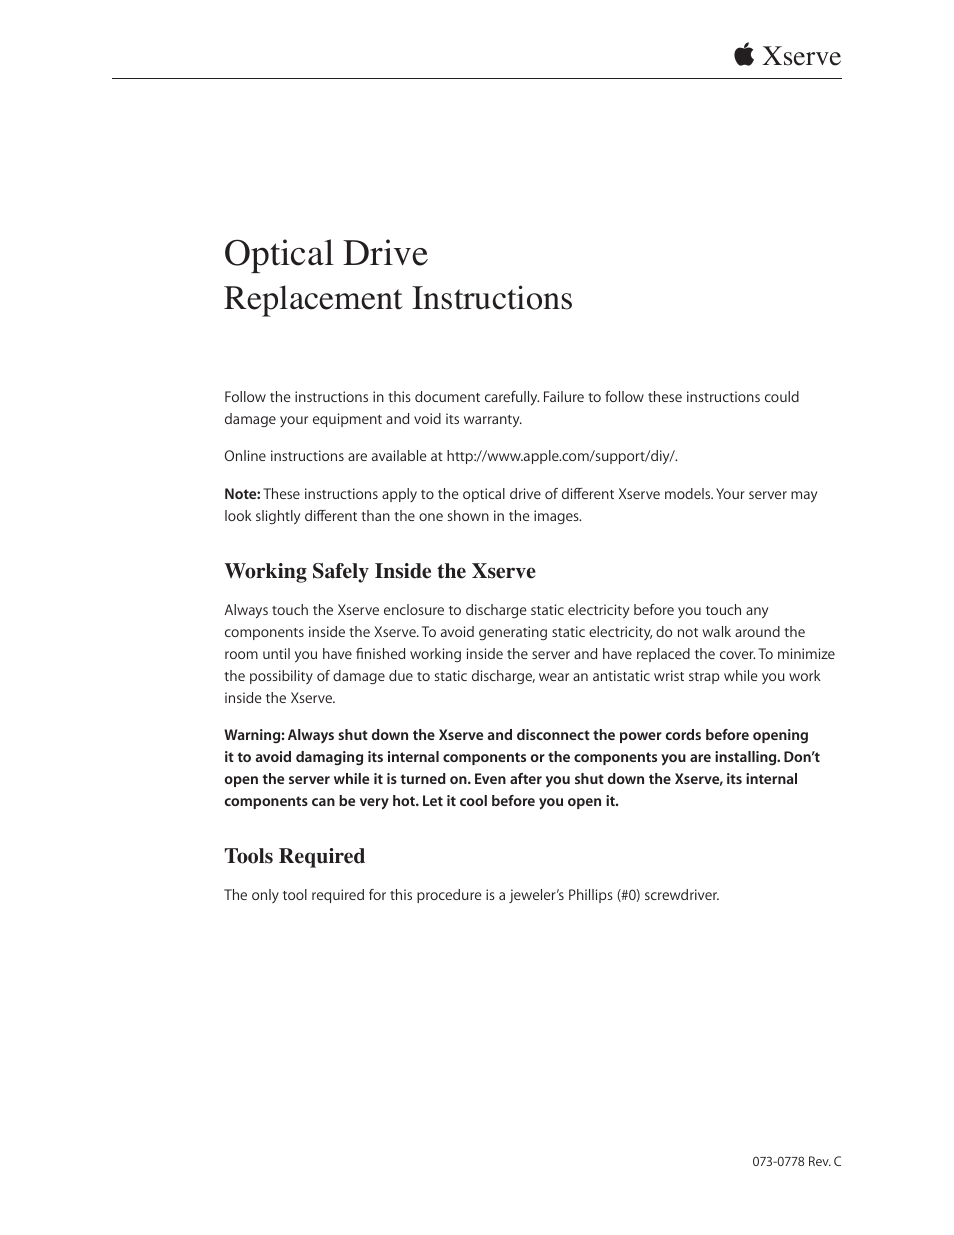 Xserve (Early 2008) DIY Procedure for Optical Drive